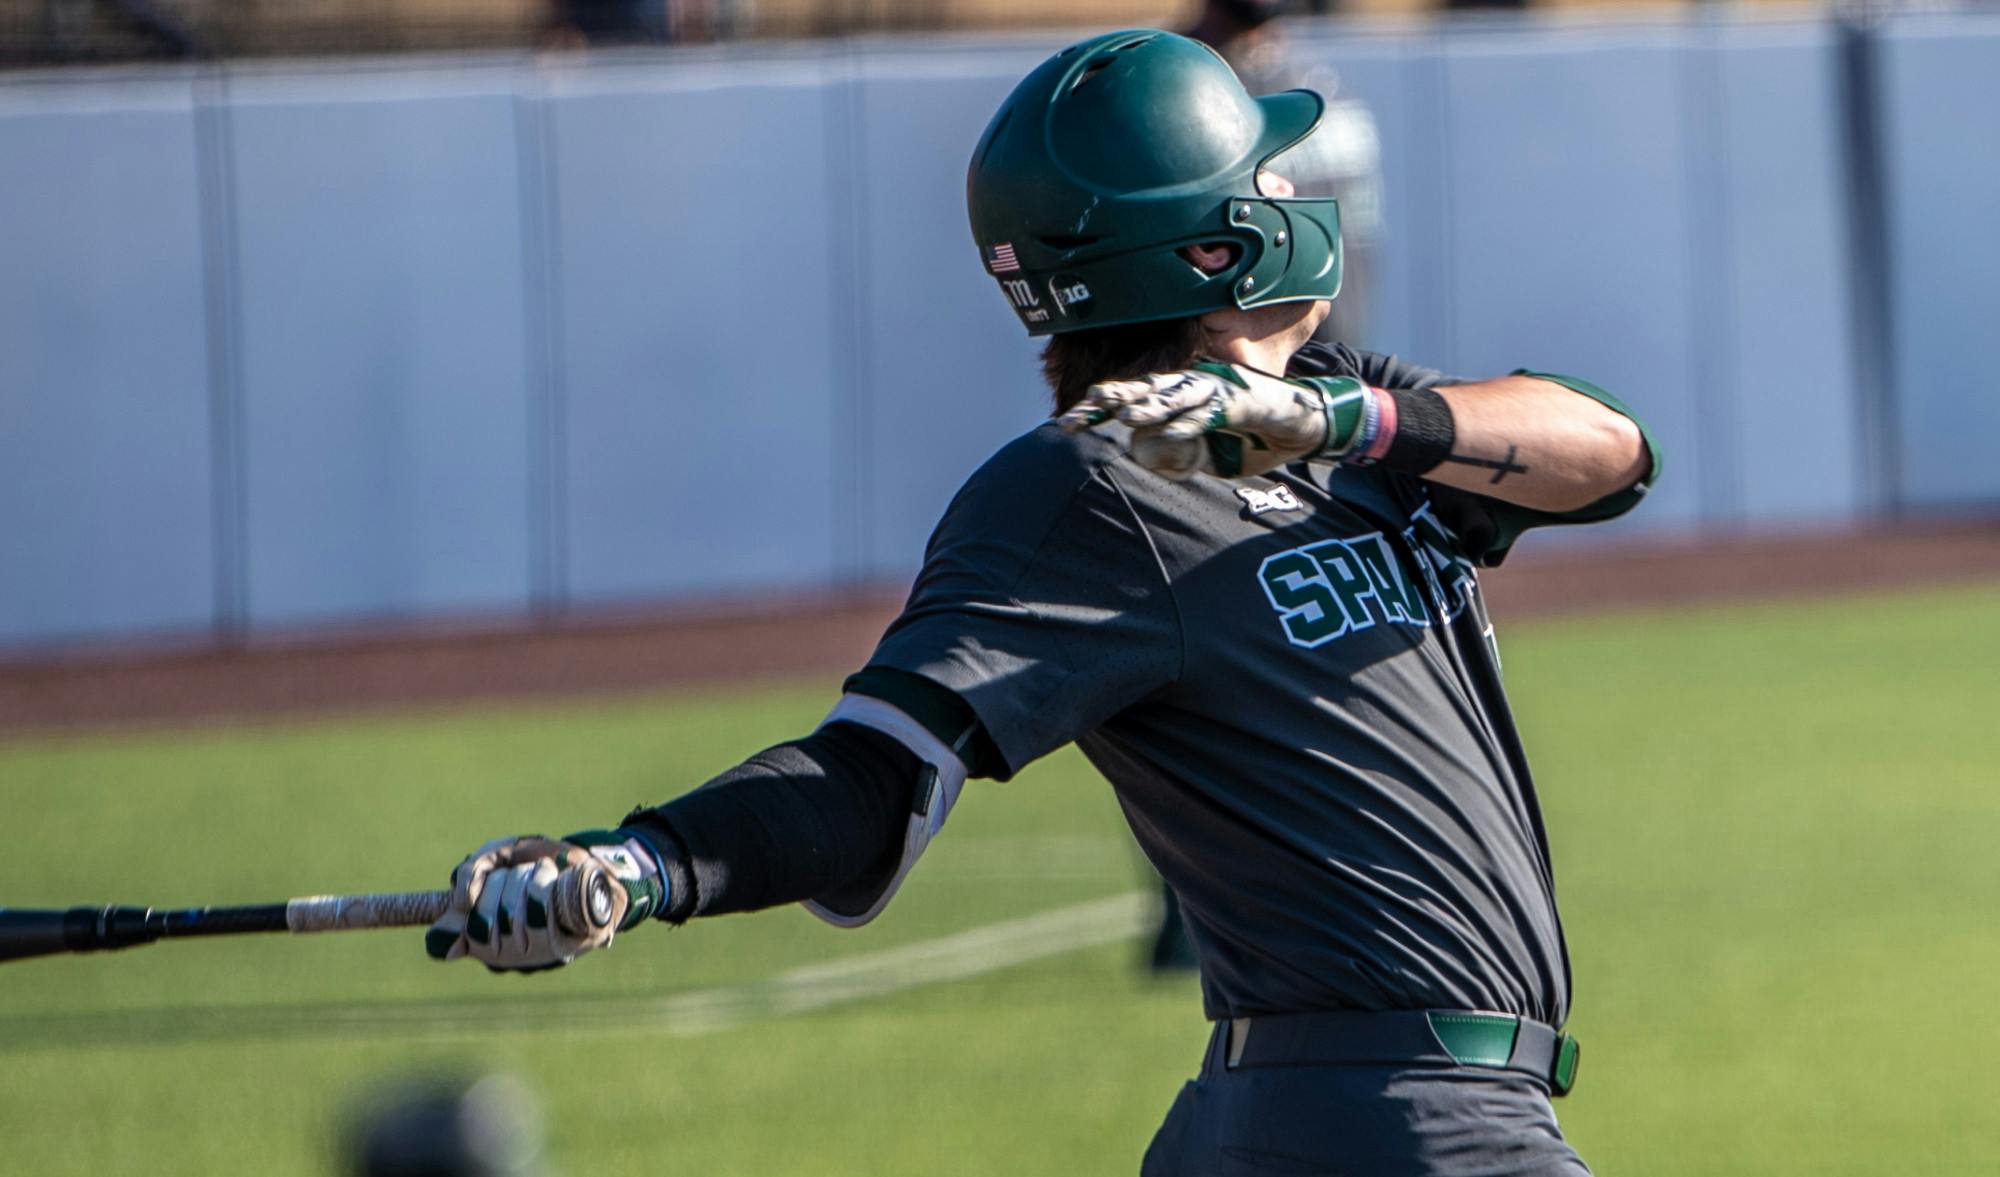 <p>Freshman infielder Brock Vradenburg (48) hits the ball resulting in a single. The Wolverines made a comeback in the ninth inning to top the Spartans, 8-7, at Ray Fisher Stadium on March 21, 2021.</p>